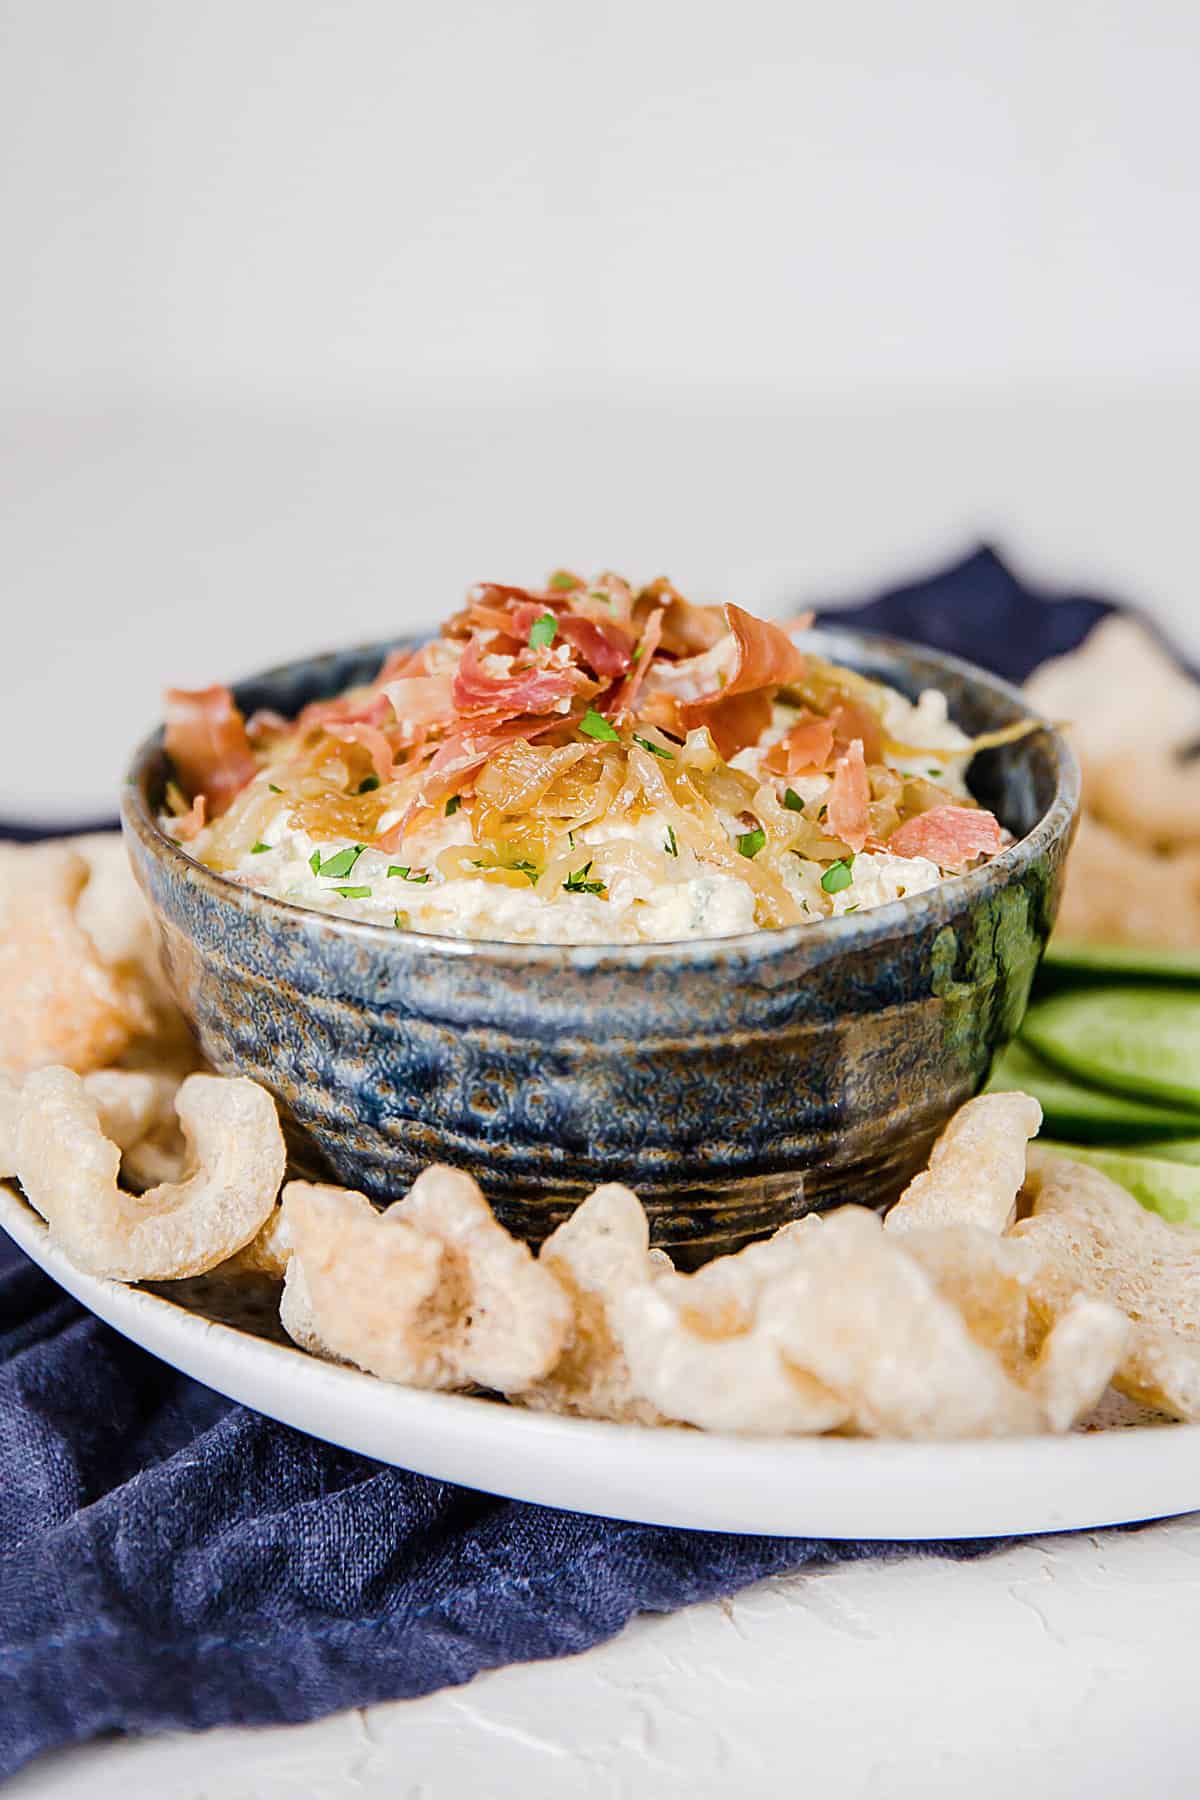 a gray bowl filled with caramelized onion dip and topped with bacon, served with pork rinds and fresh veggies.